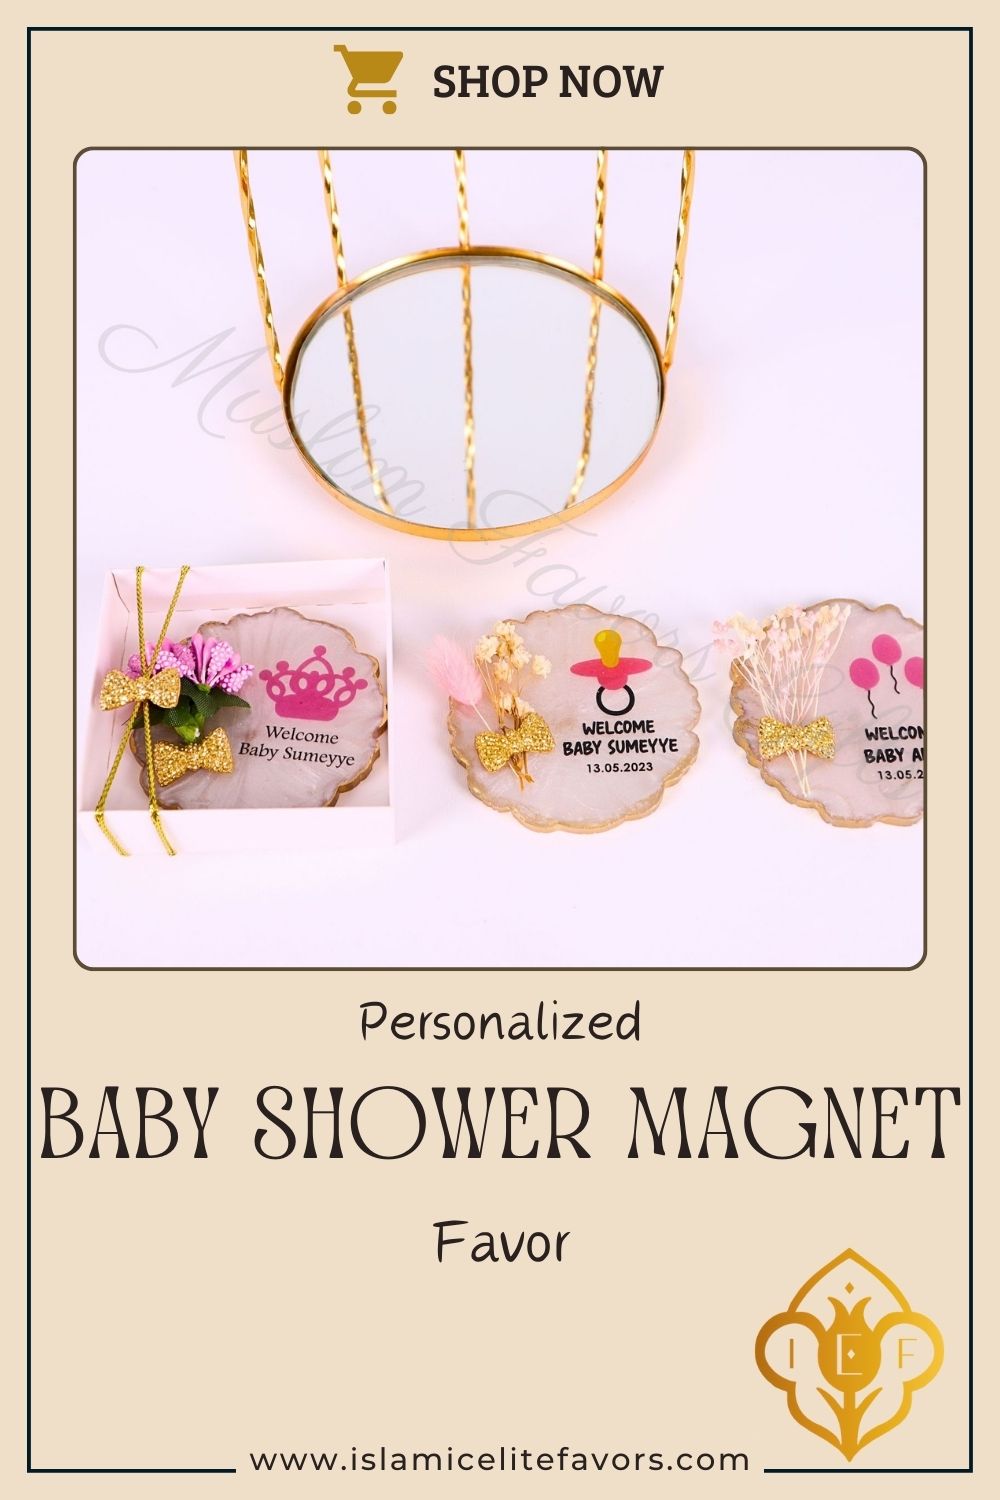 Personalized Baby Shower Favors Epoxy Magnet for Baby Girl White Theme - Islamic Elite Favors is a handmade gift shop offering a wide variety of unique and personalized gifts for all occasions. Whether you're looking for the perfect Ramadan, Eid, Hajj, wedding gift or something special for a birthday, baby shower or anniversary, we have something for everyone. High quality, made with love.